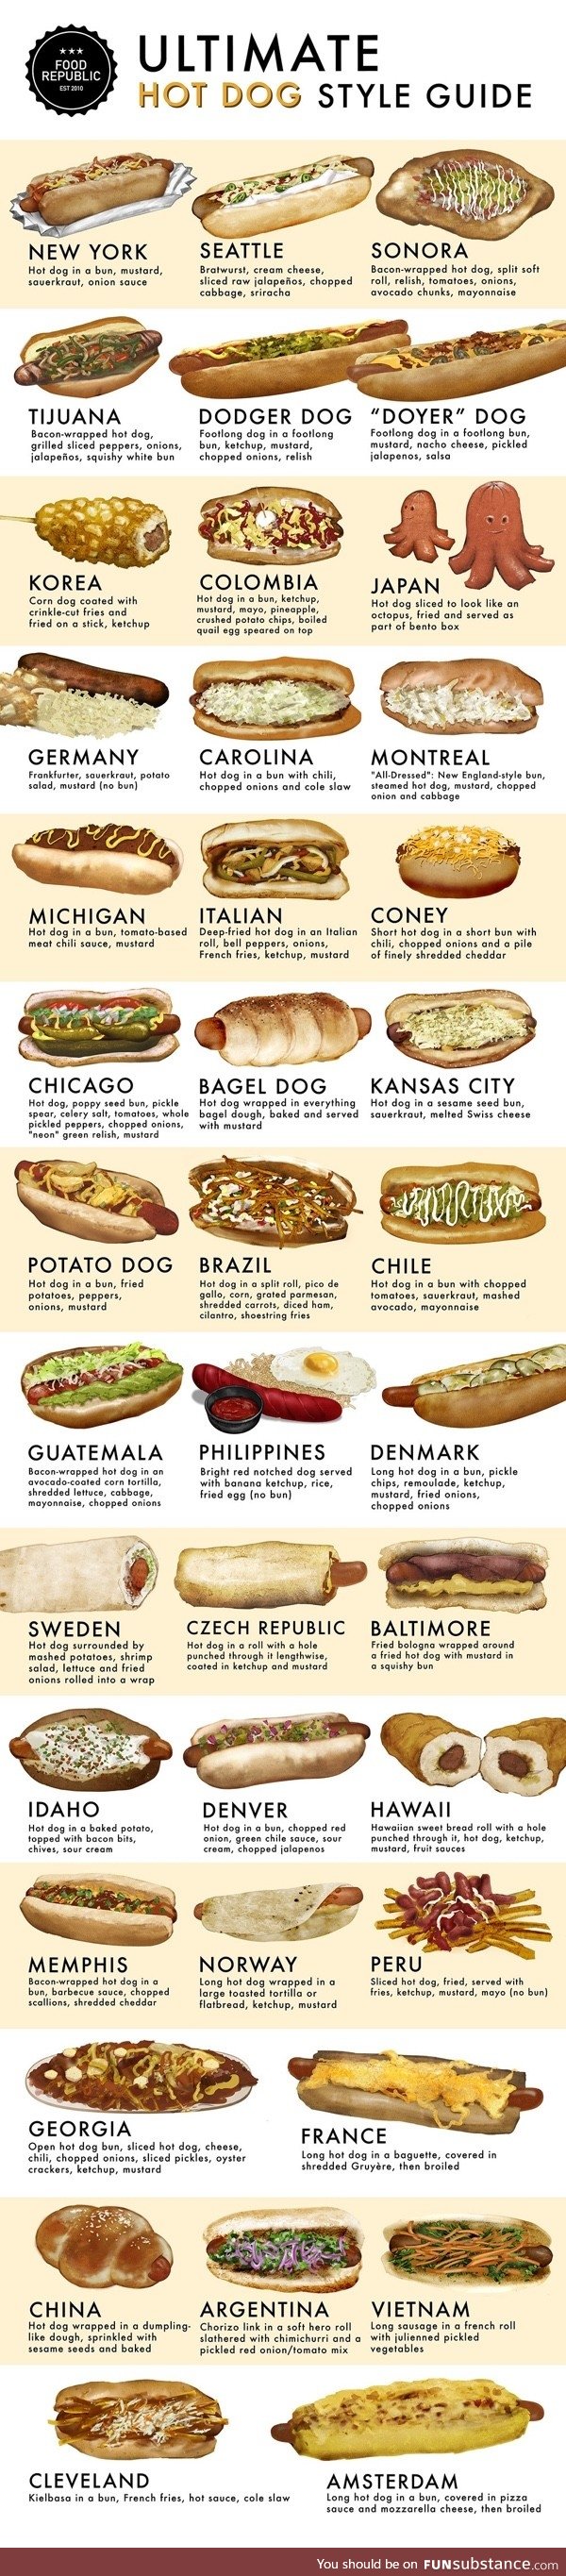 The ultimate hot dog style guide